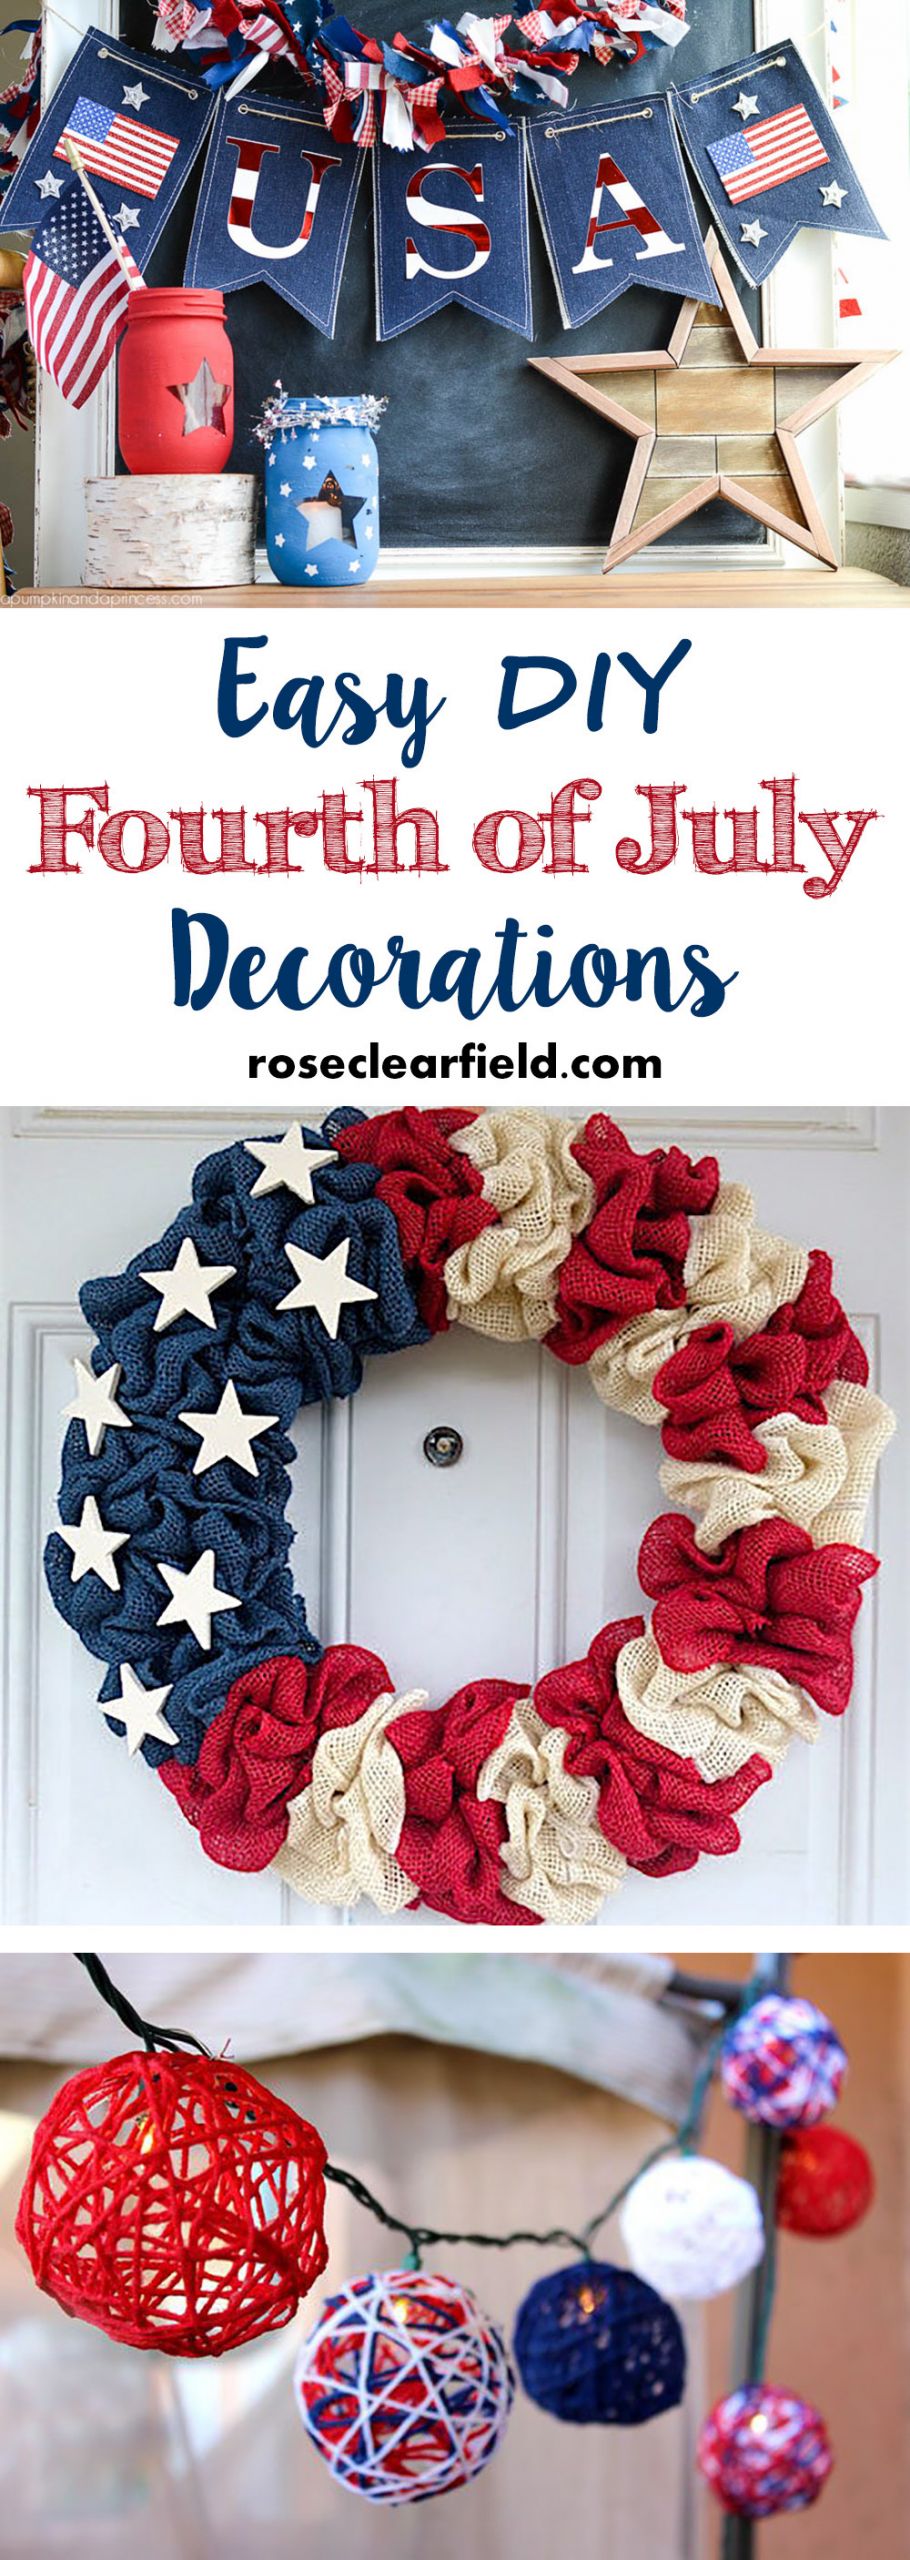 4th Of July Decorating Ideas
 Easy DIY Fourth of July Decorations • Rose Clearfield